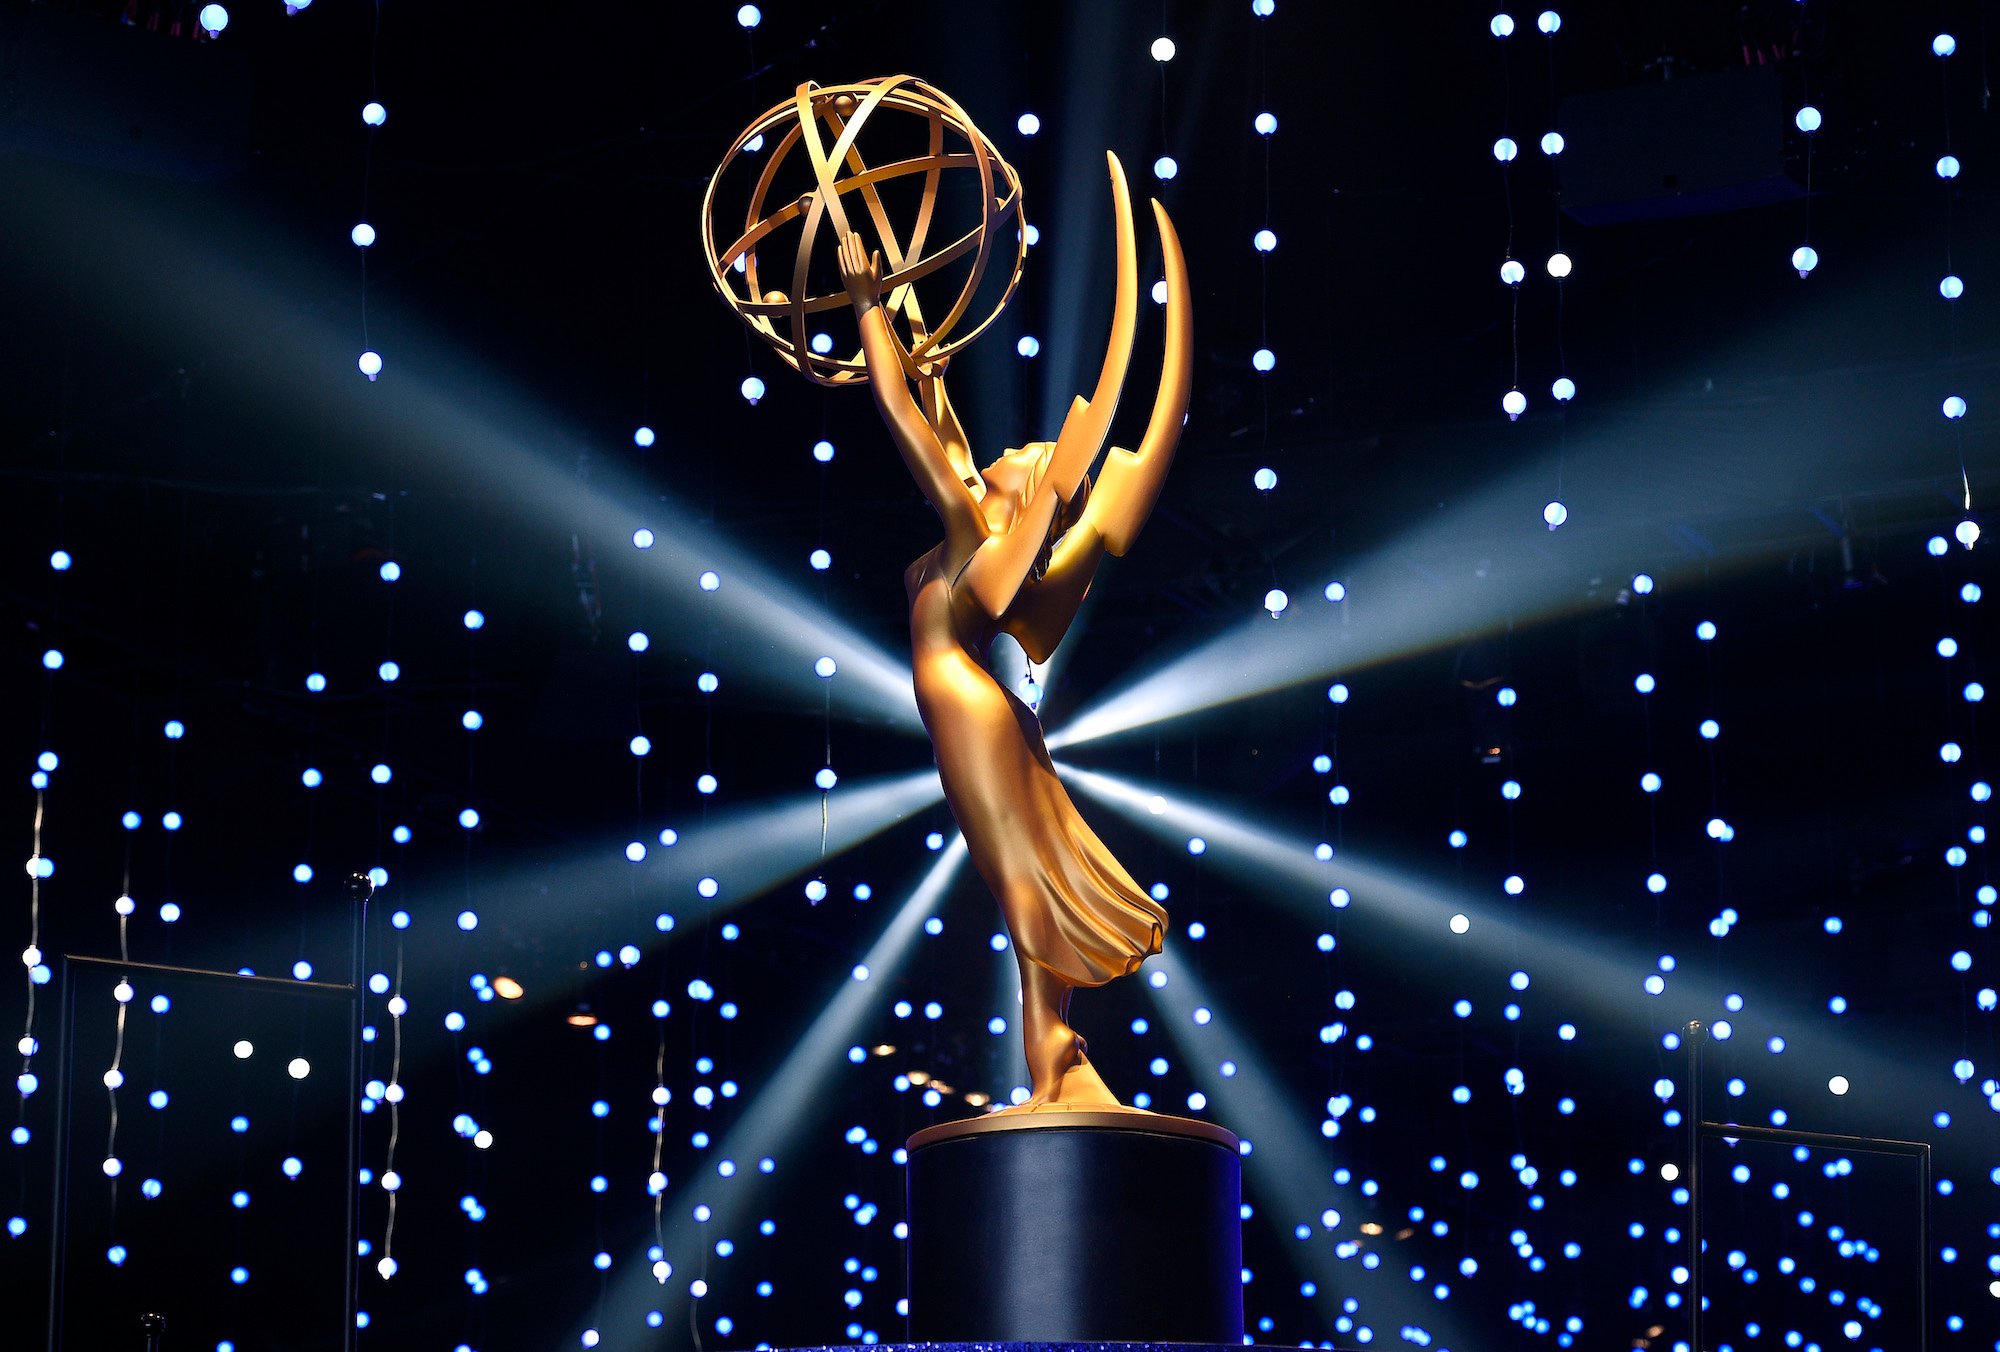 Large model of the statuette of the Emmy Award illuminated on a stage